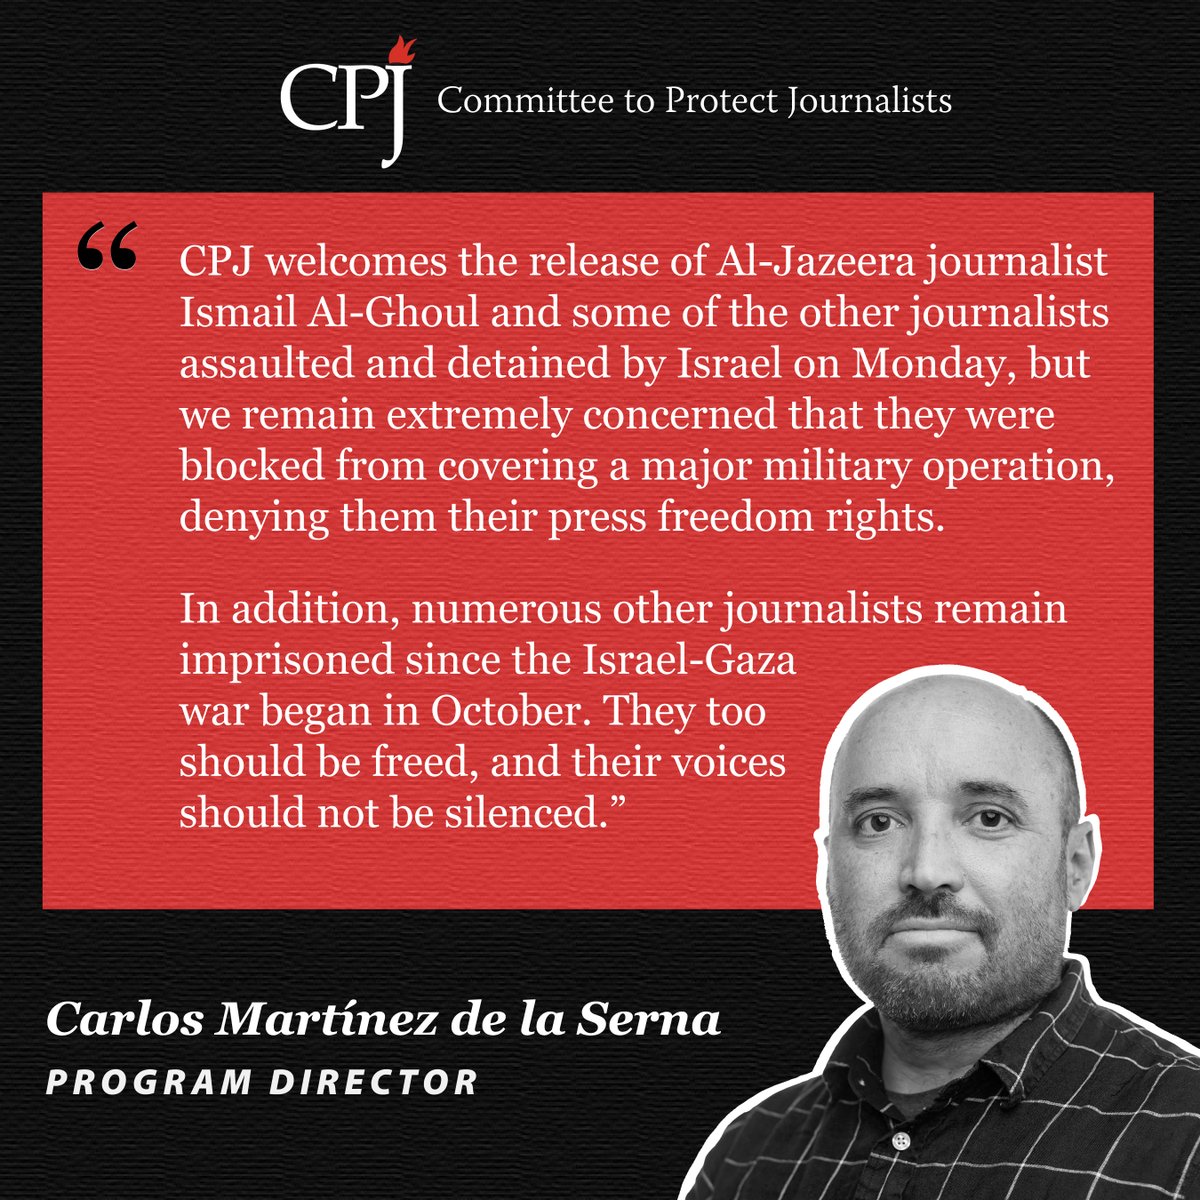 CPJ welcomes the release of Al-Jazeera journalist Ismail Al-Ghoul and some of the other journalists assaulted and detained by Israel on Monday, but we remain extremely concerned that they were blocked from covering a major military operation, denying them their press freedom…